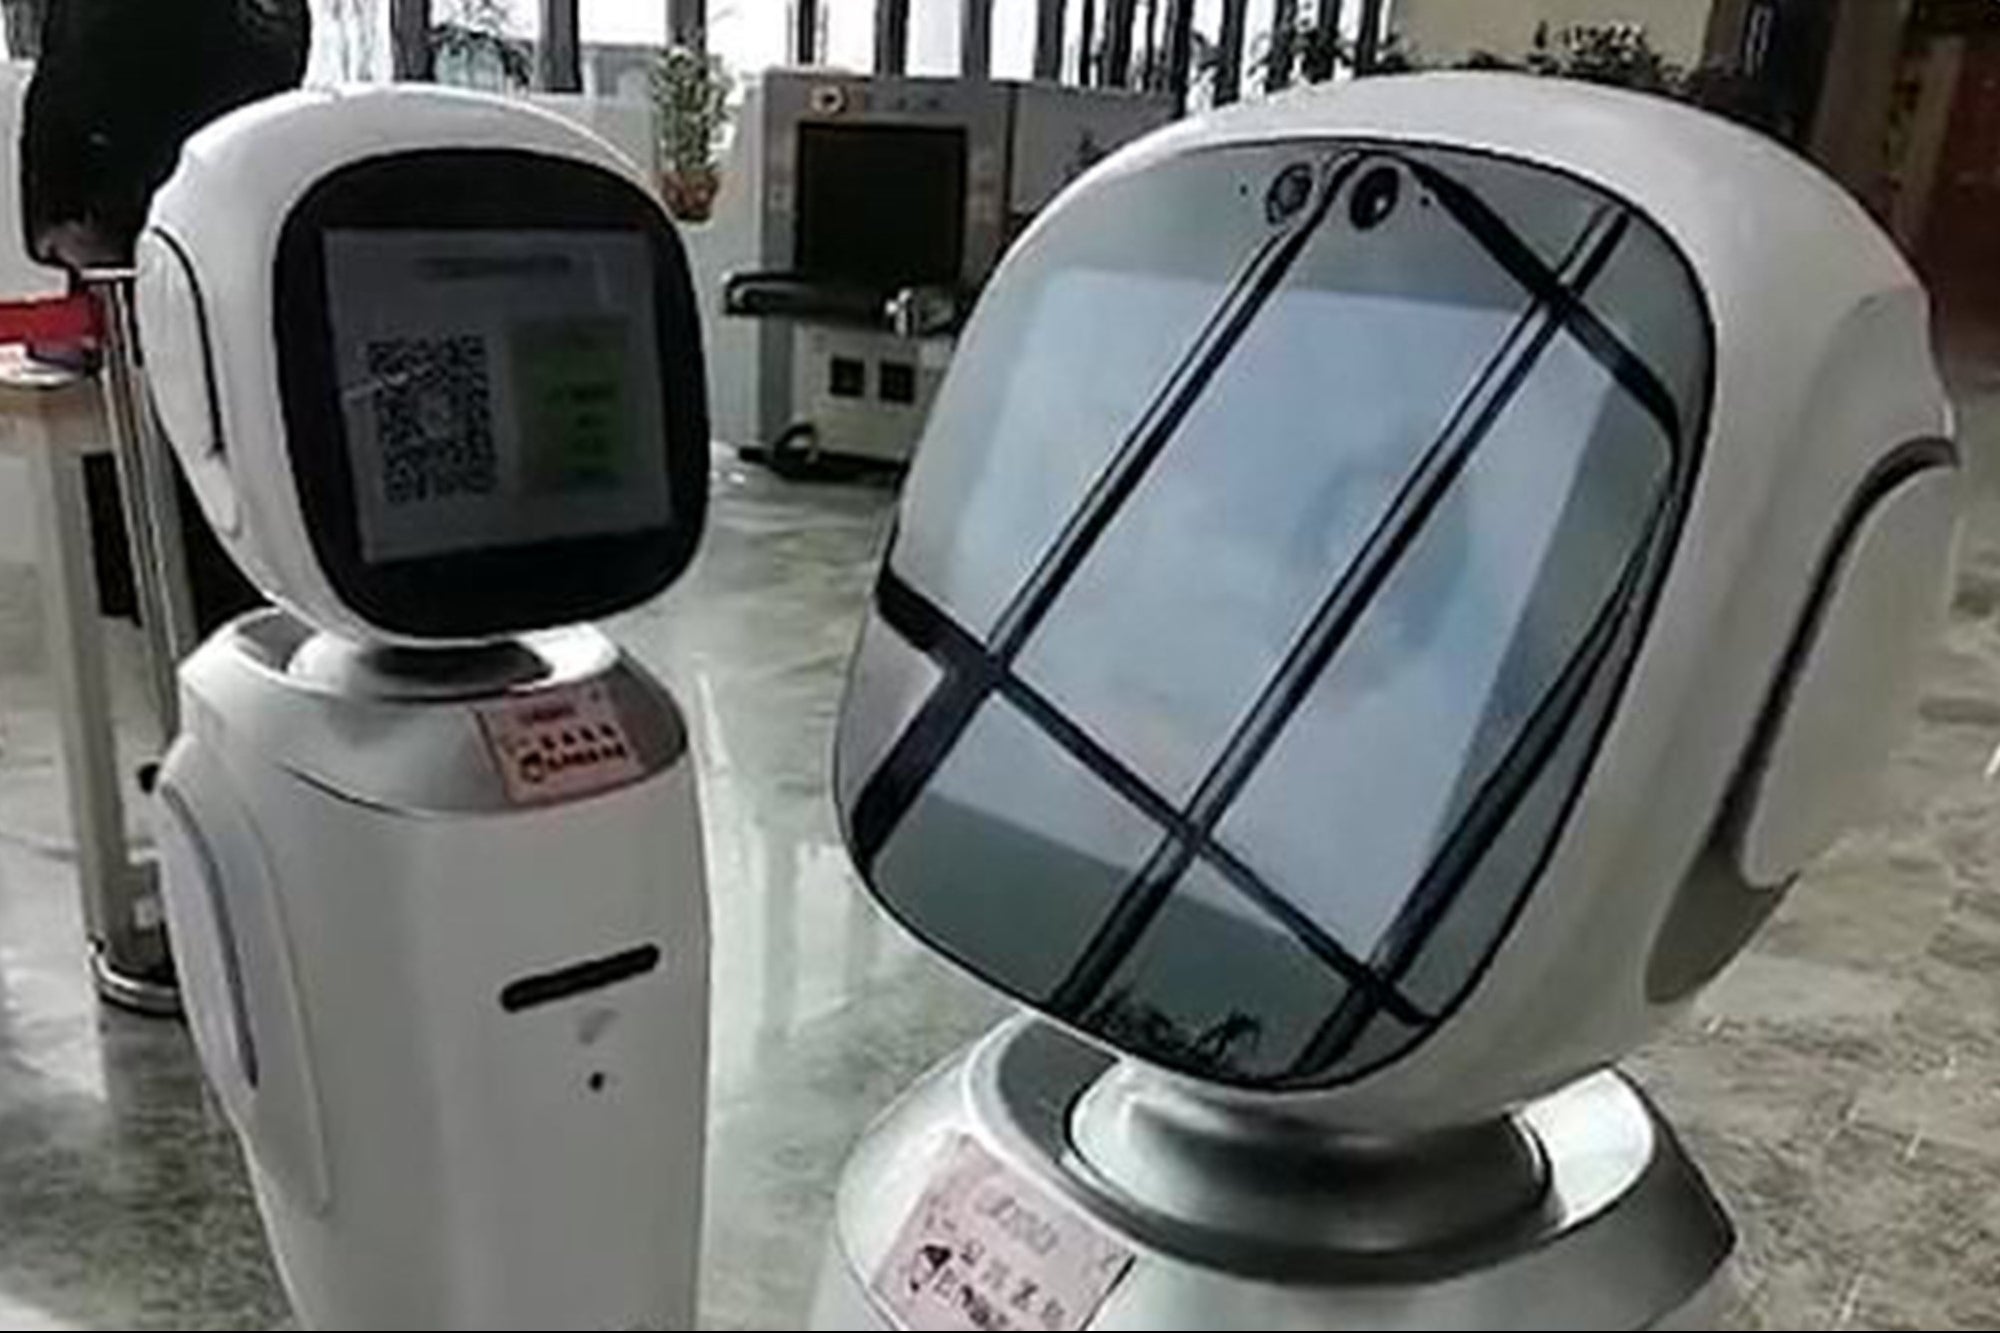 VIDEO: two robots are the protagonists of a heated discussion in a public library in China